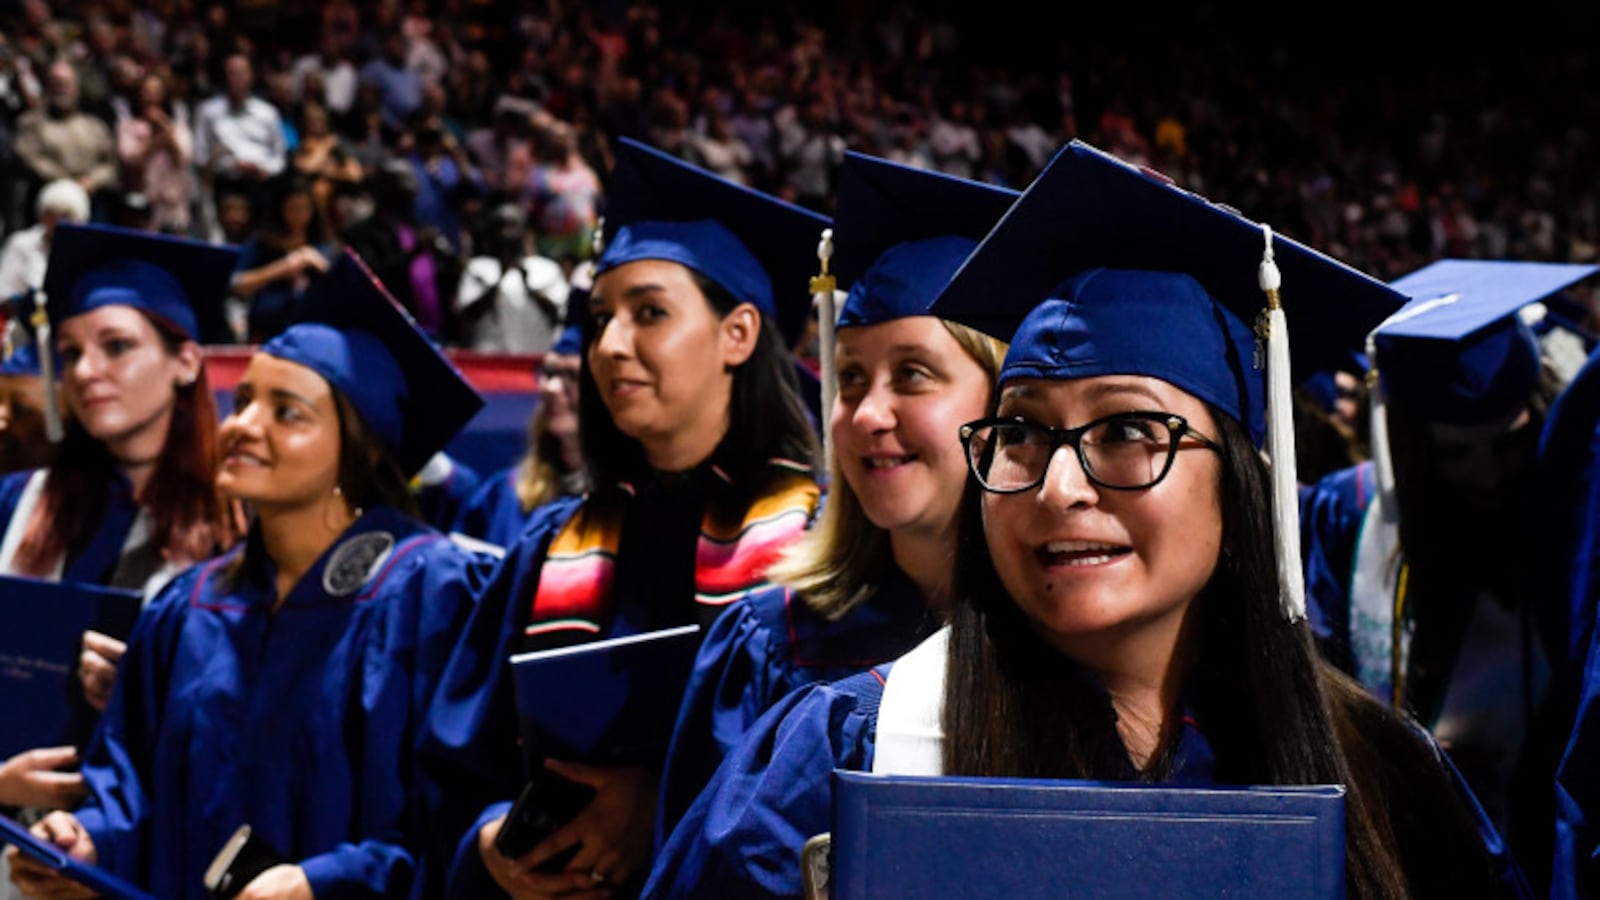 Samantha Kyon (right) smiles during a graduation ceremony at Metropolitan State University of Denver in May 2018.